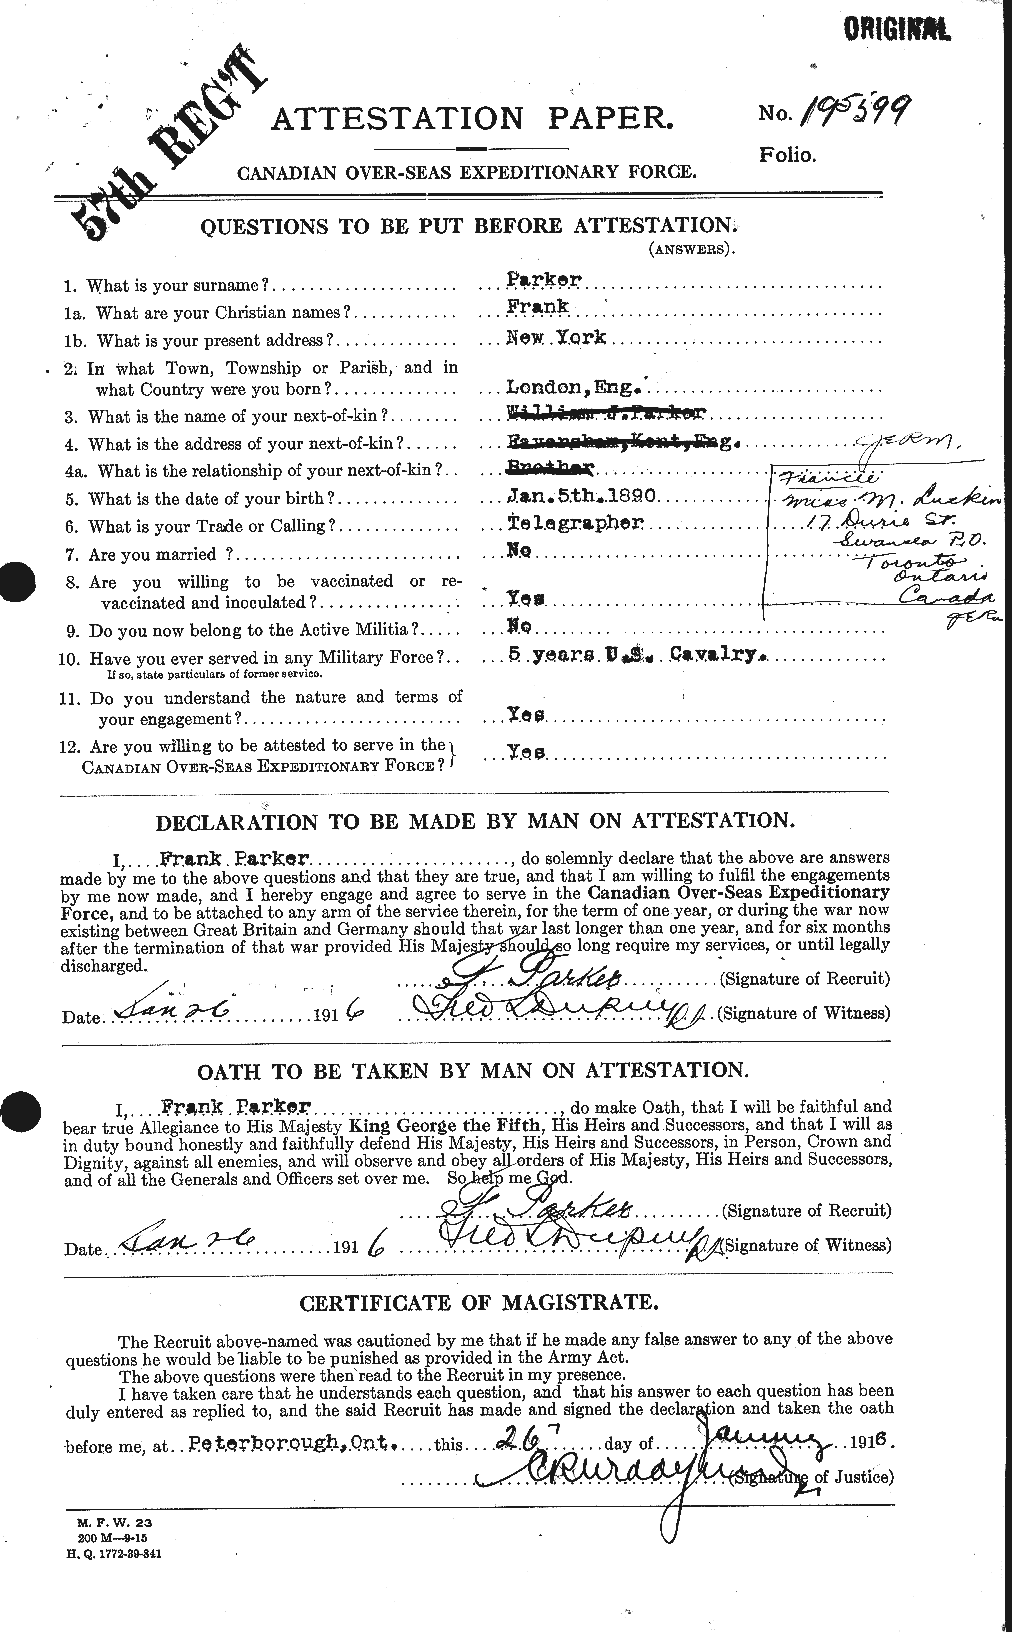 Personnel Records of the First World War - CEF 565184a